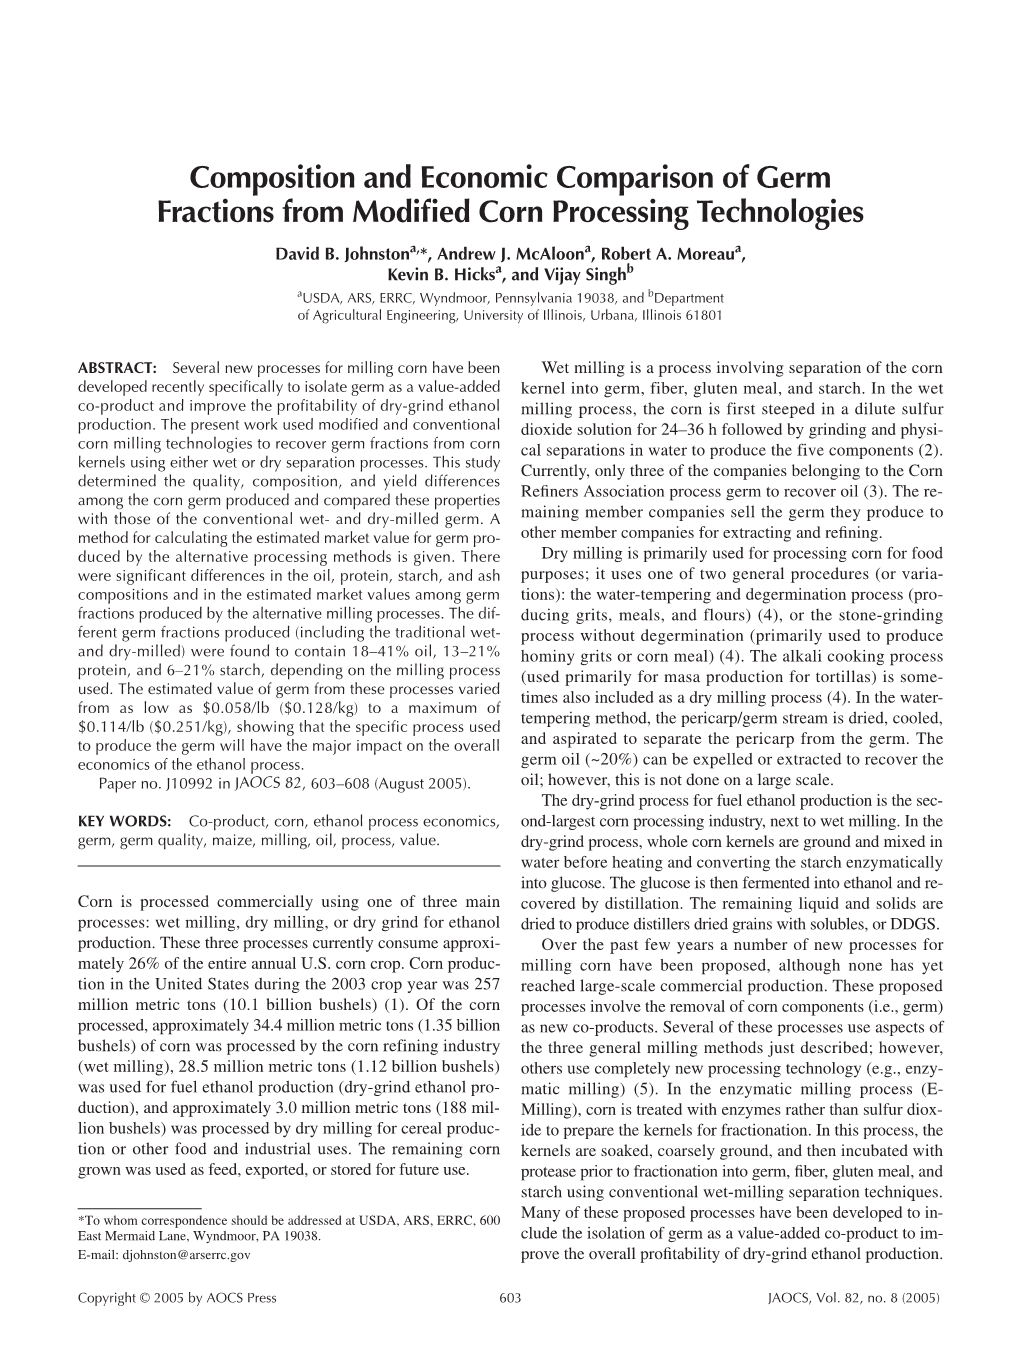 Composition and Economic Comparison of Germ Fractions from Modiﬁed Corn Processing Technologies David B